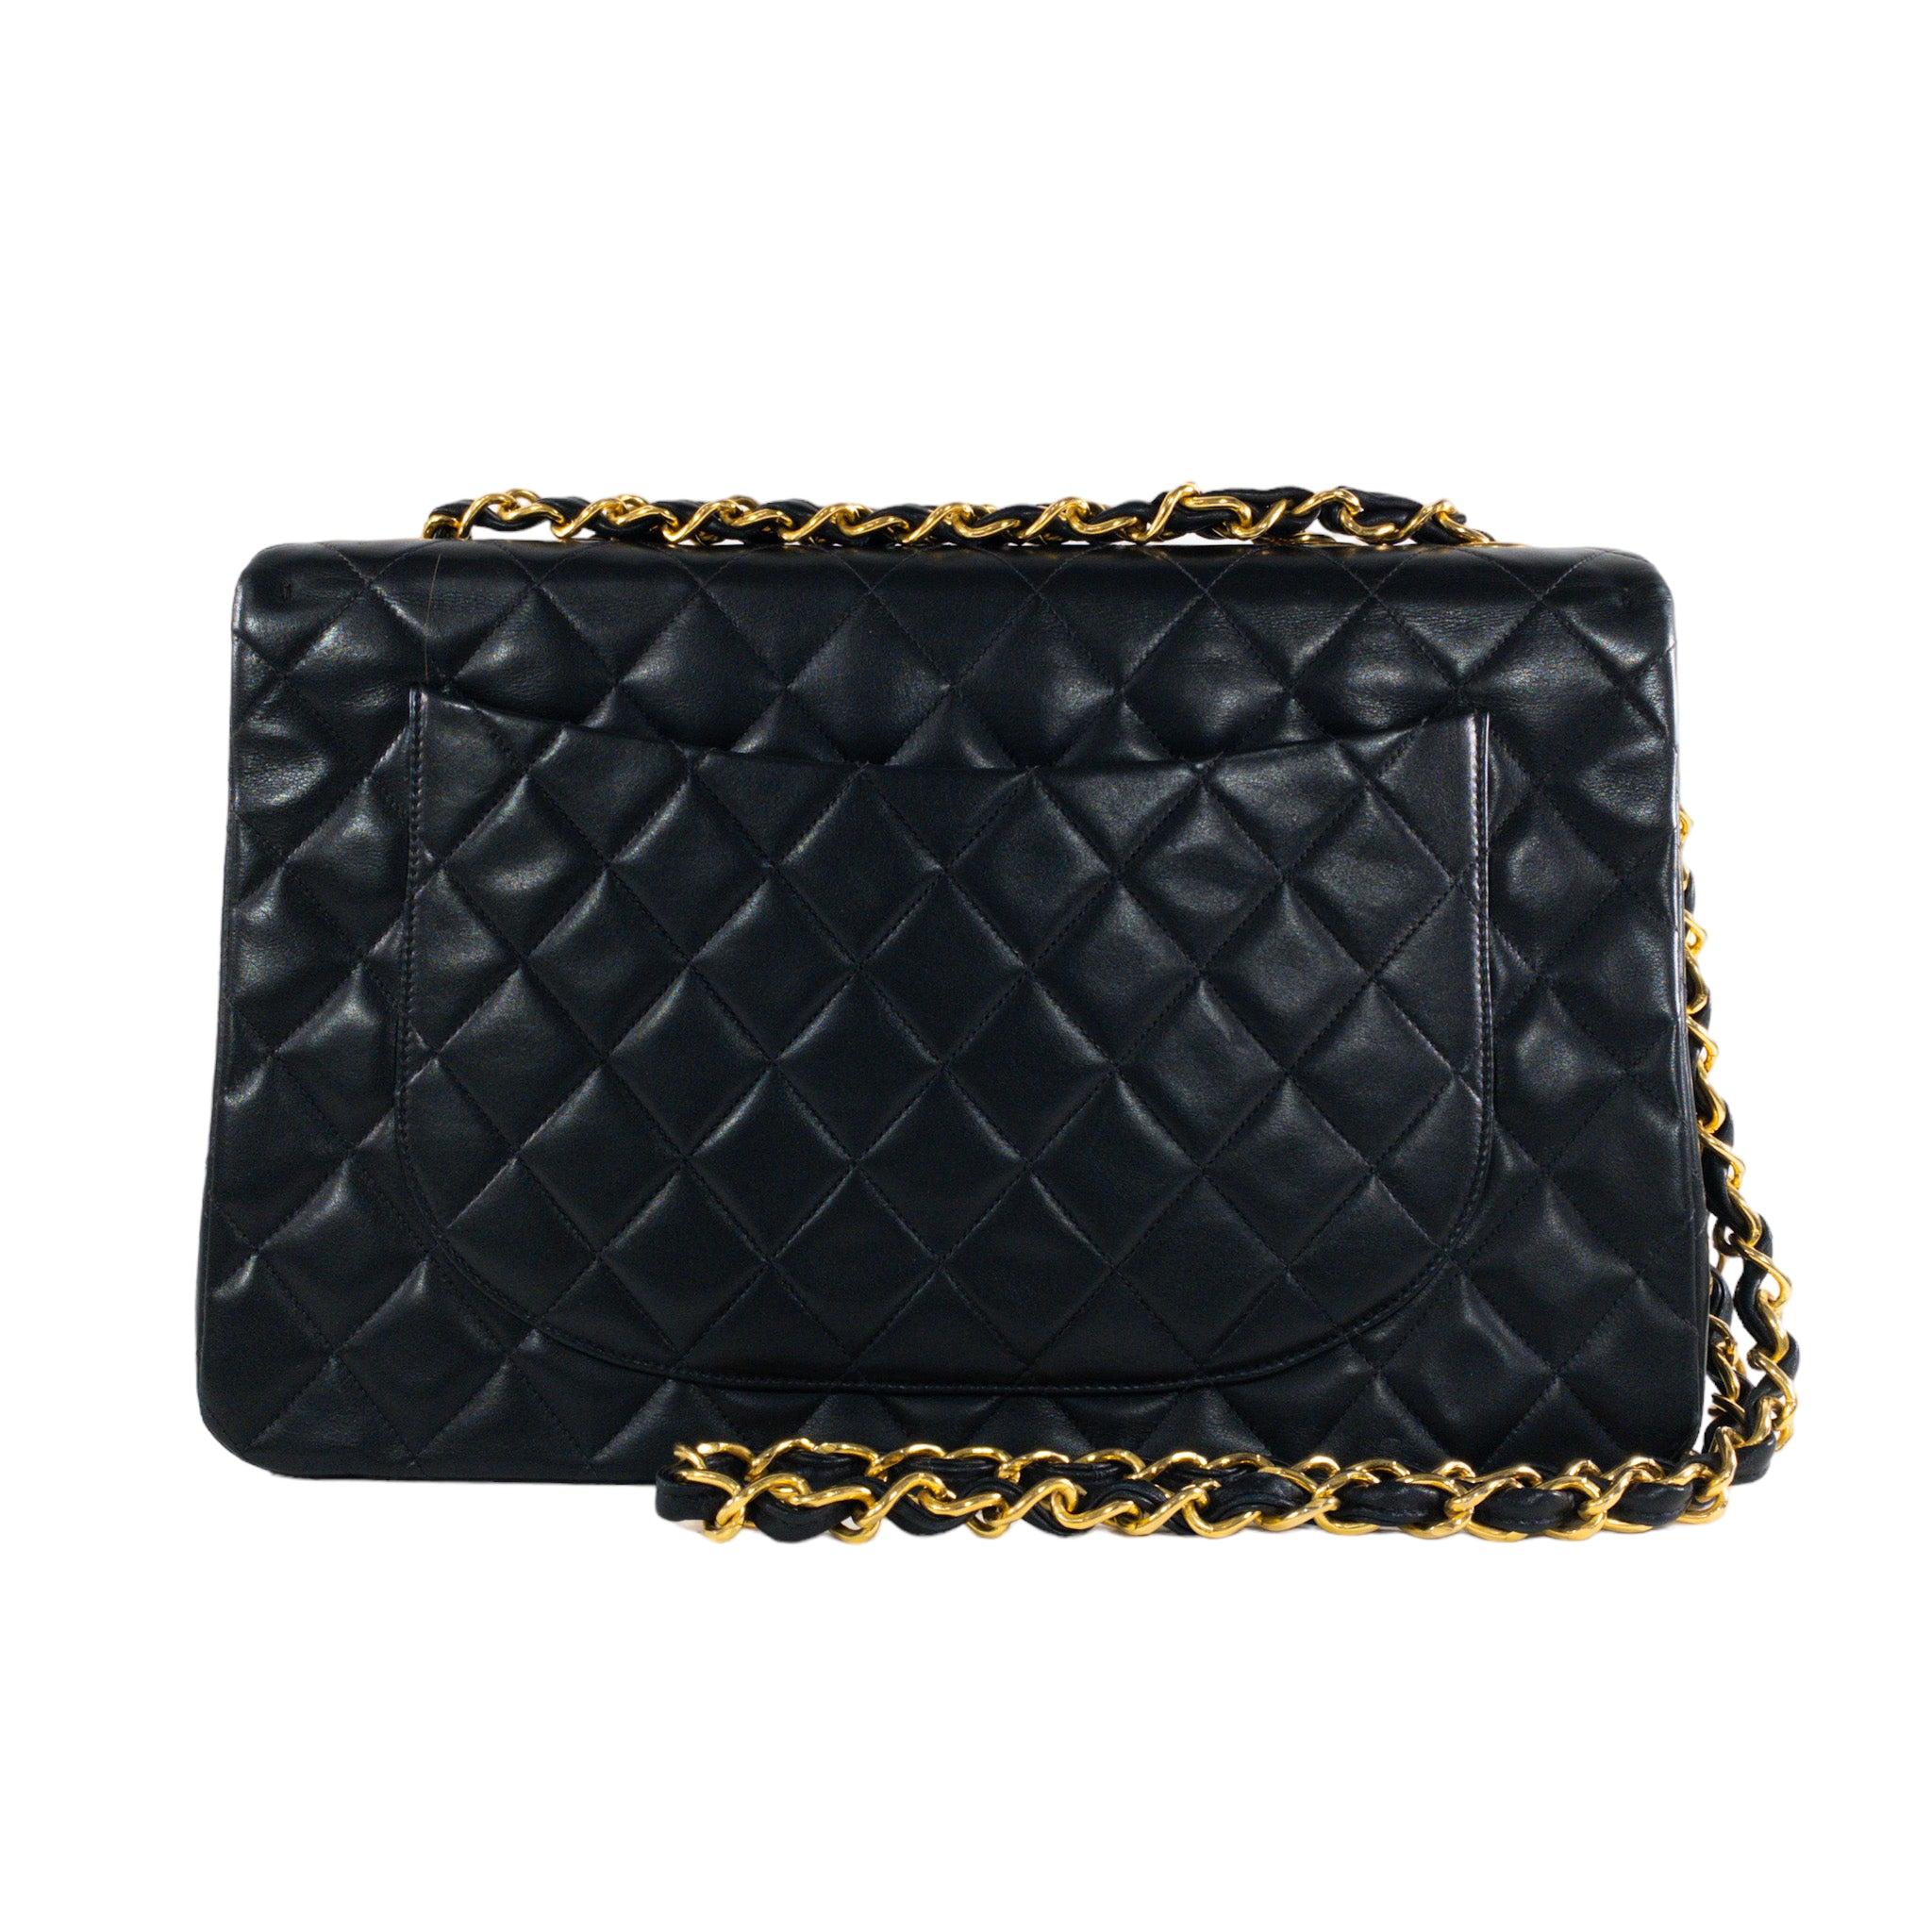 Chanel Vintage Black Lambskin Maxi Single Flap Classic Bag

This is an authentic Chanel vintage Maxi single flap. Extra large CC turn- clasp in plated gold. Quilted lambskin throughout. Sinlge flap with CC logo stitched inside. Burgundy leather